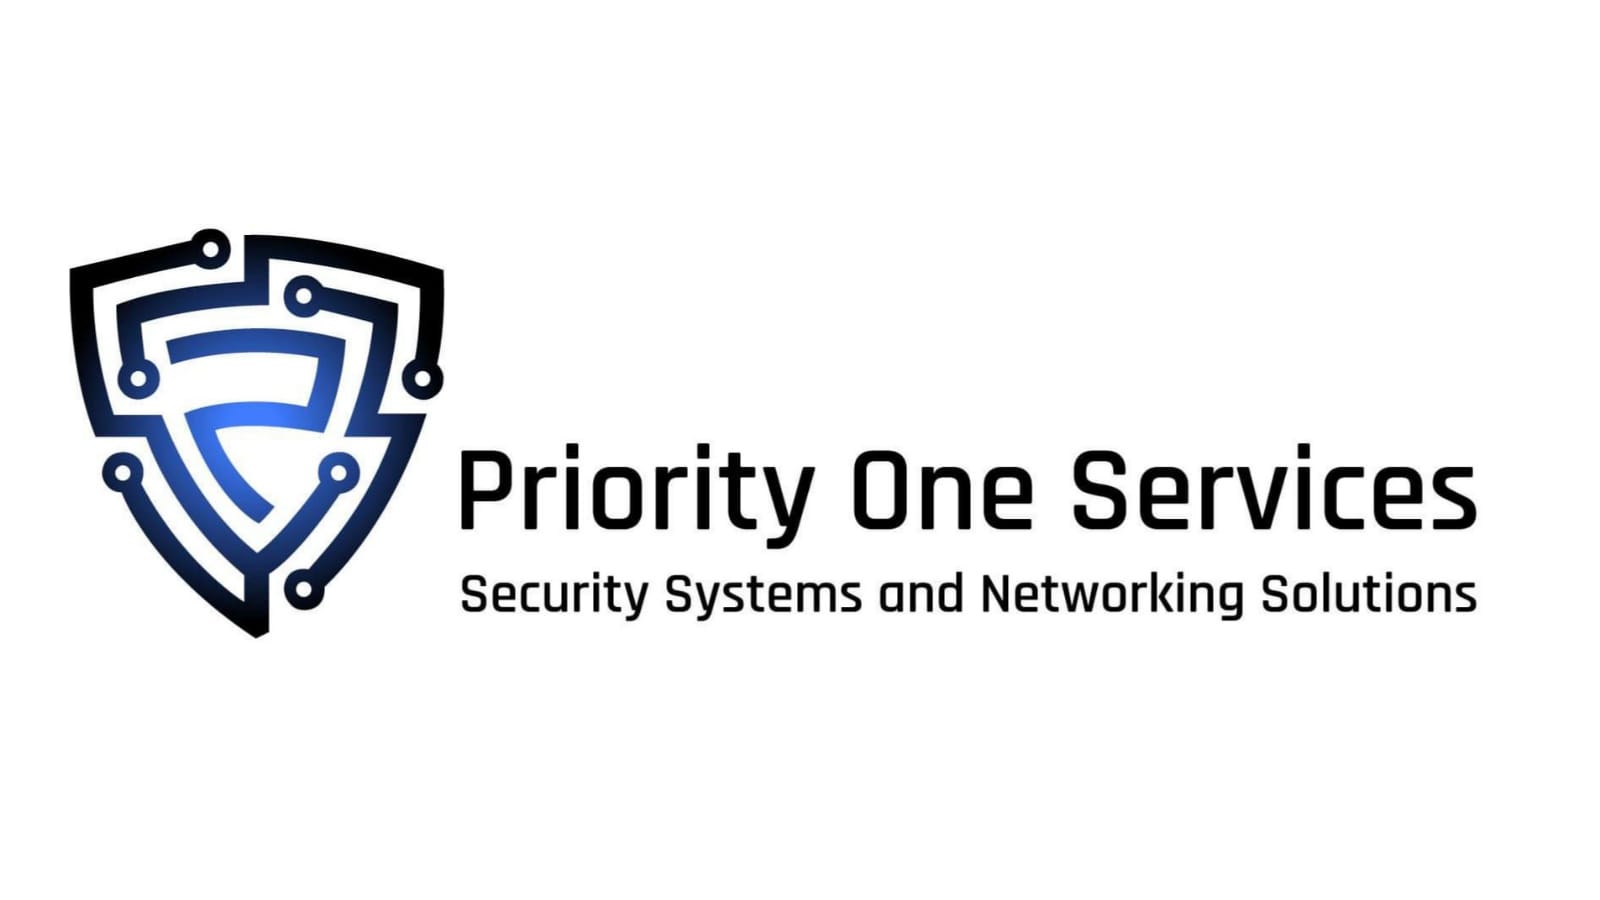 Priority One Services